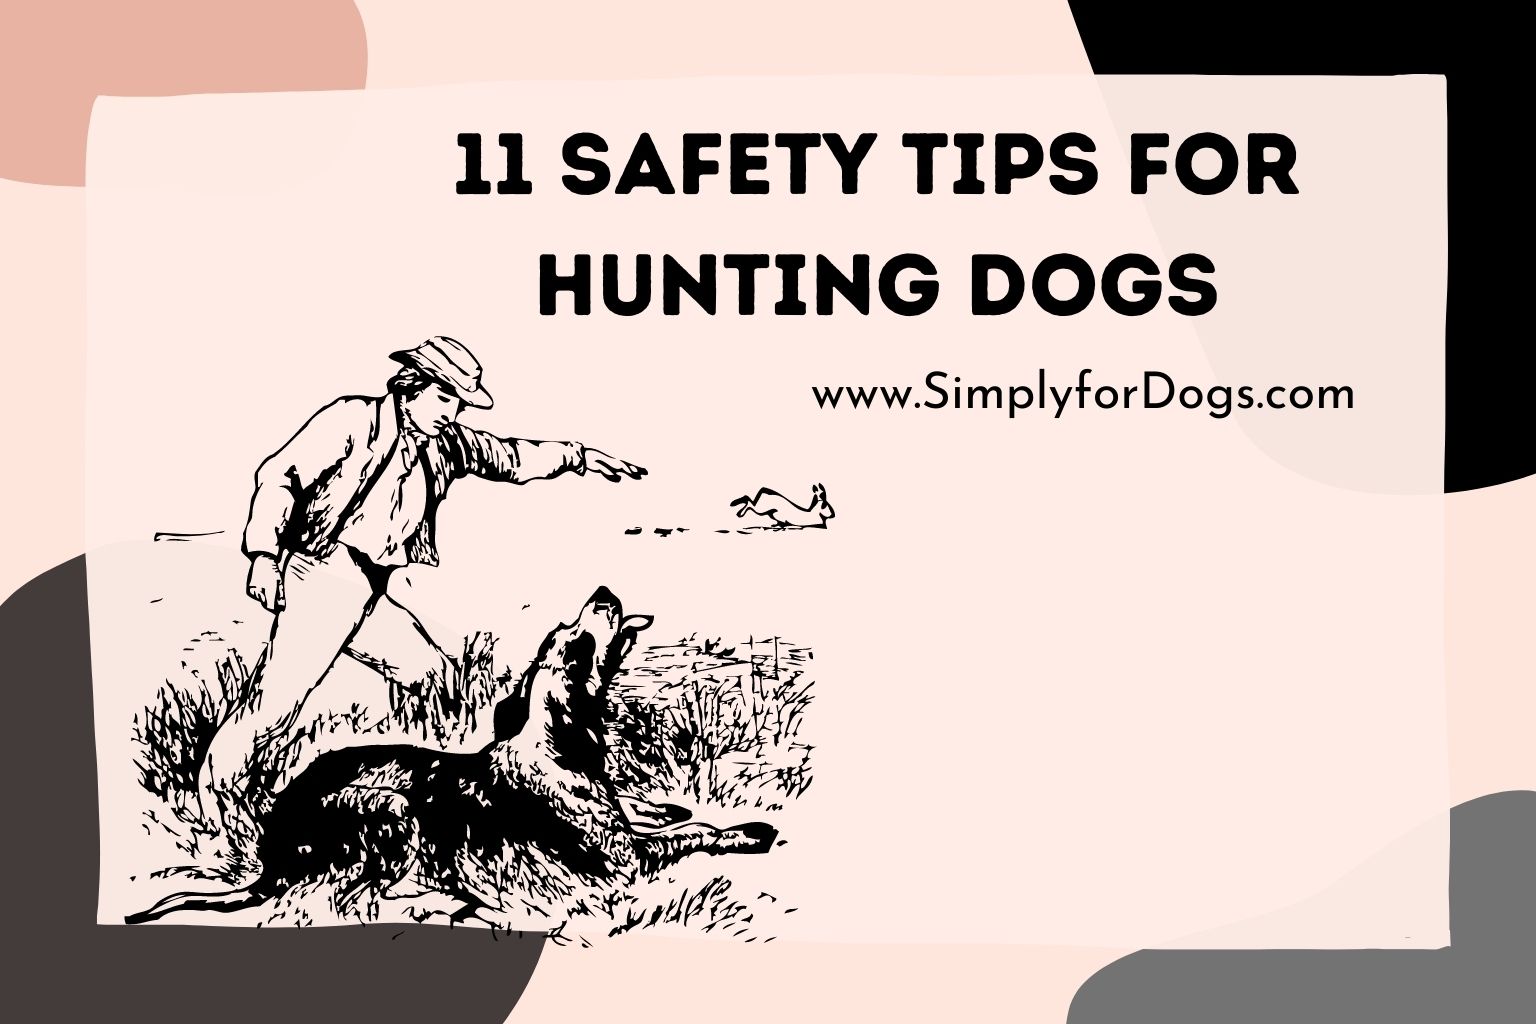 11 Safety Tips for Hunting Dogs